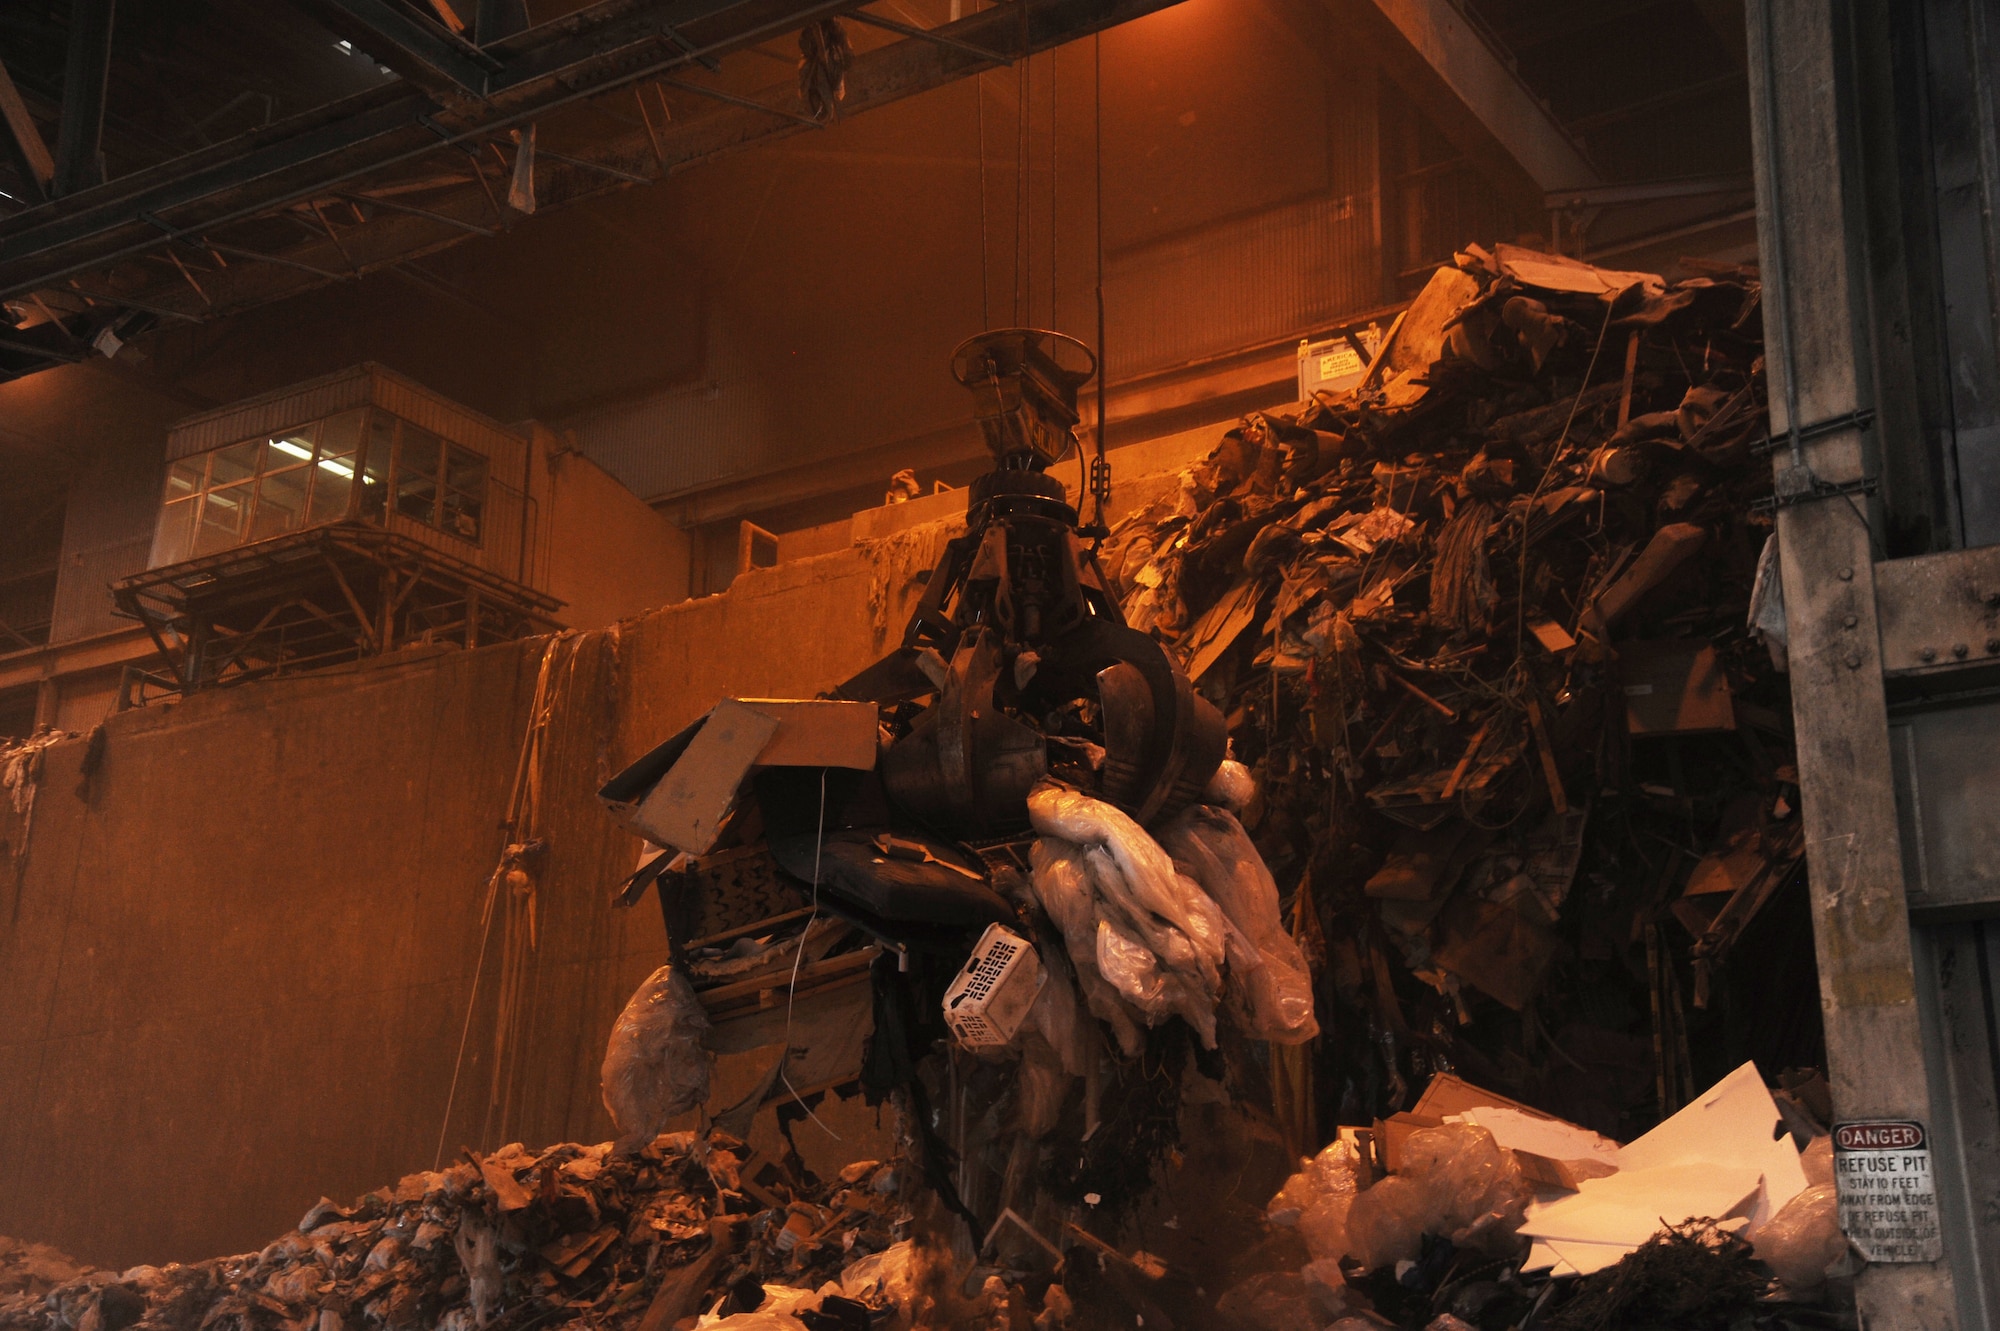 The trash collection claw scoops up a load of refuse at the Waste to Energy plant near Spokane, Wash., June 16, 2015.Waste from Fairchild Air Force Base contributes to the 800 tons of trash the facility burns a day, resulting in enough electrical energy to power 13,000 homes. (U.S. Air Force photo/Senior Airman Sam Fogleman)